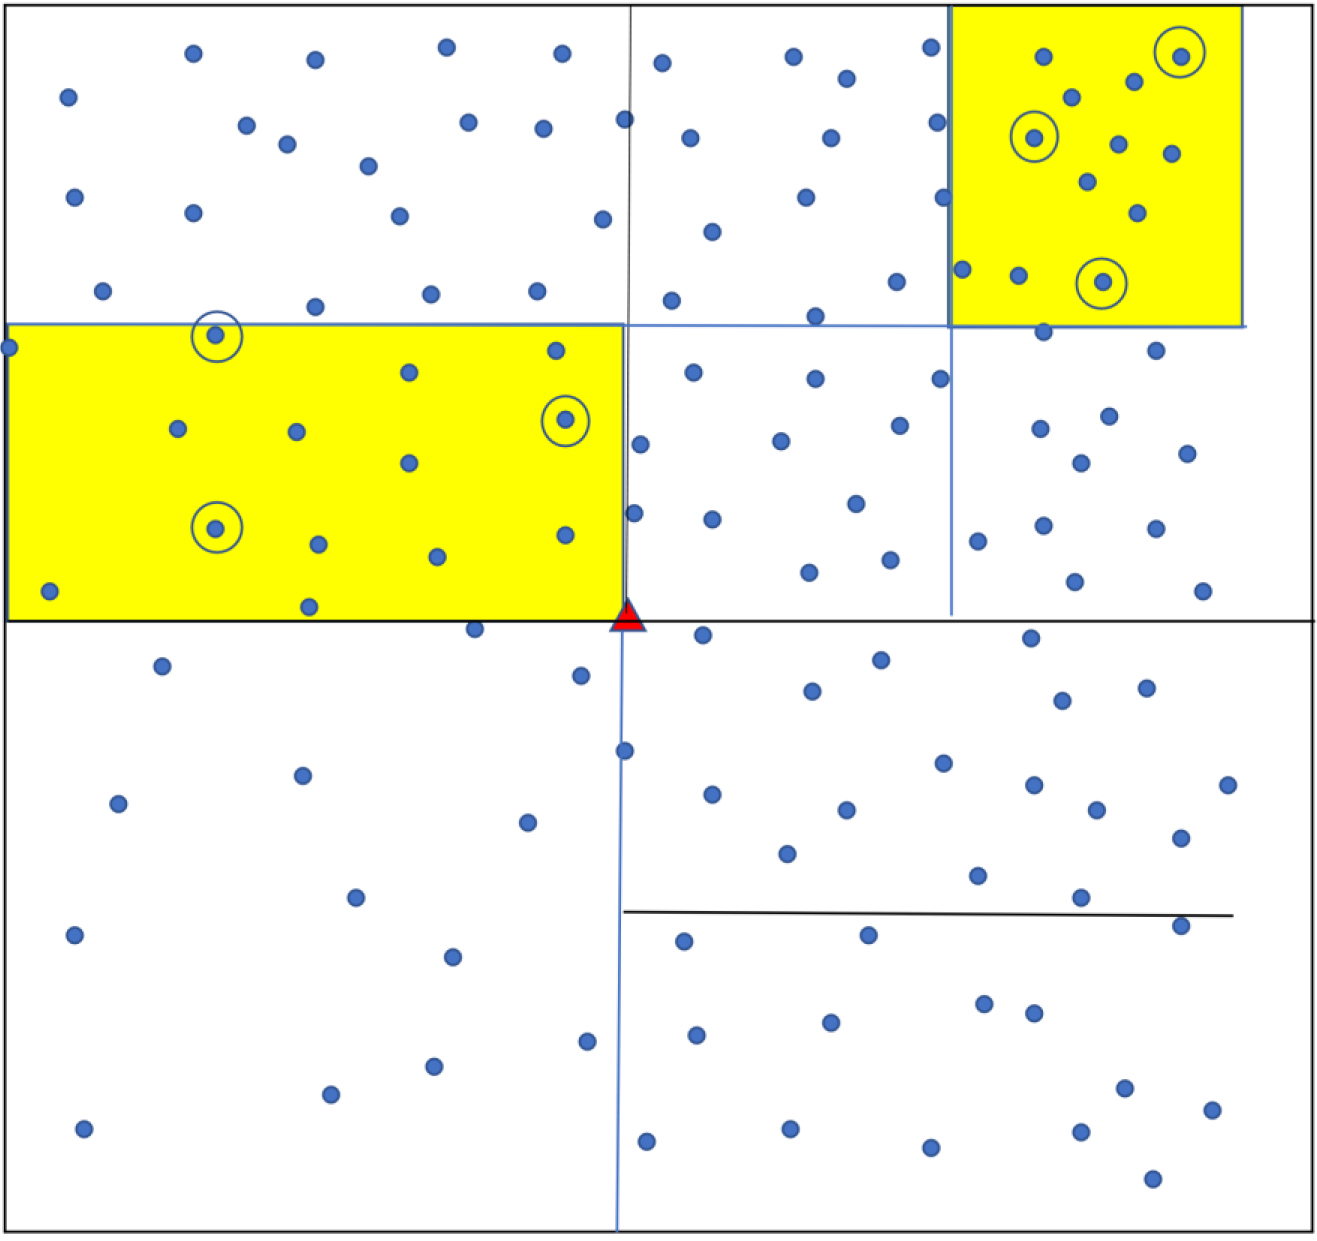 Small area (SA) sampling. The town or population is divided into successively smaller areas until each contains a number of households in the pre-specified range. Several small areas (yellow shading) are randomly chosen. Three households are randomly sampled from each selected small area.